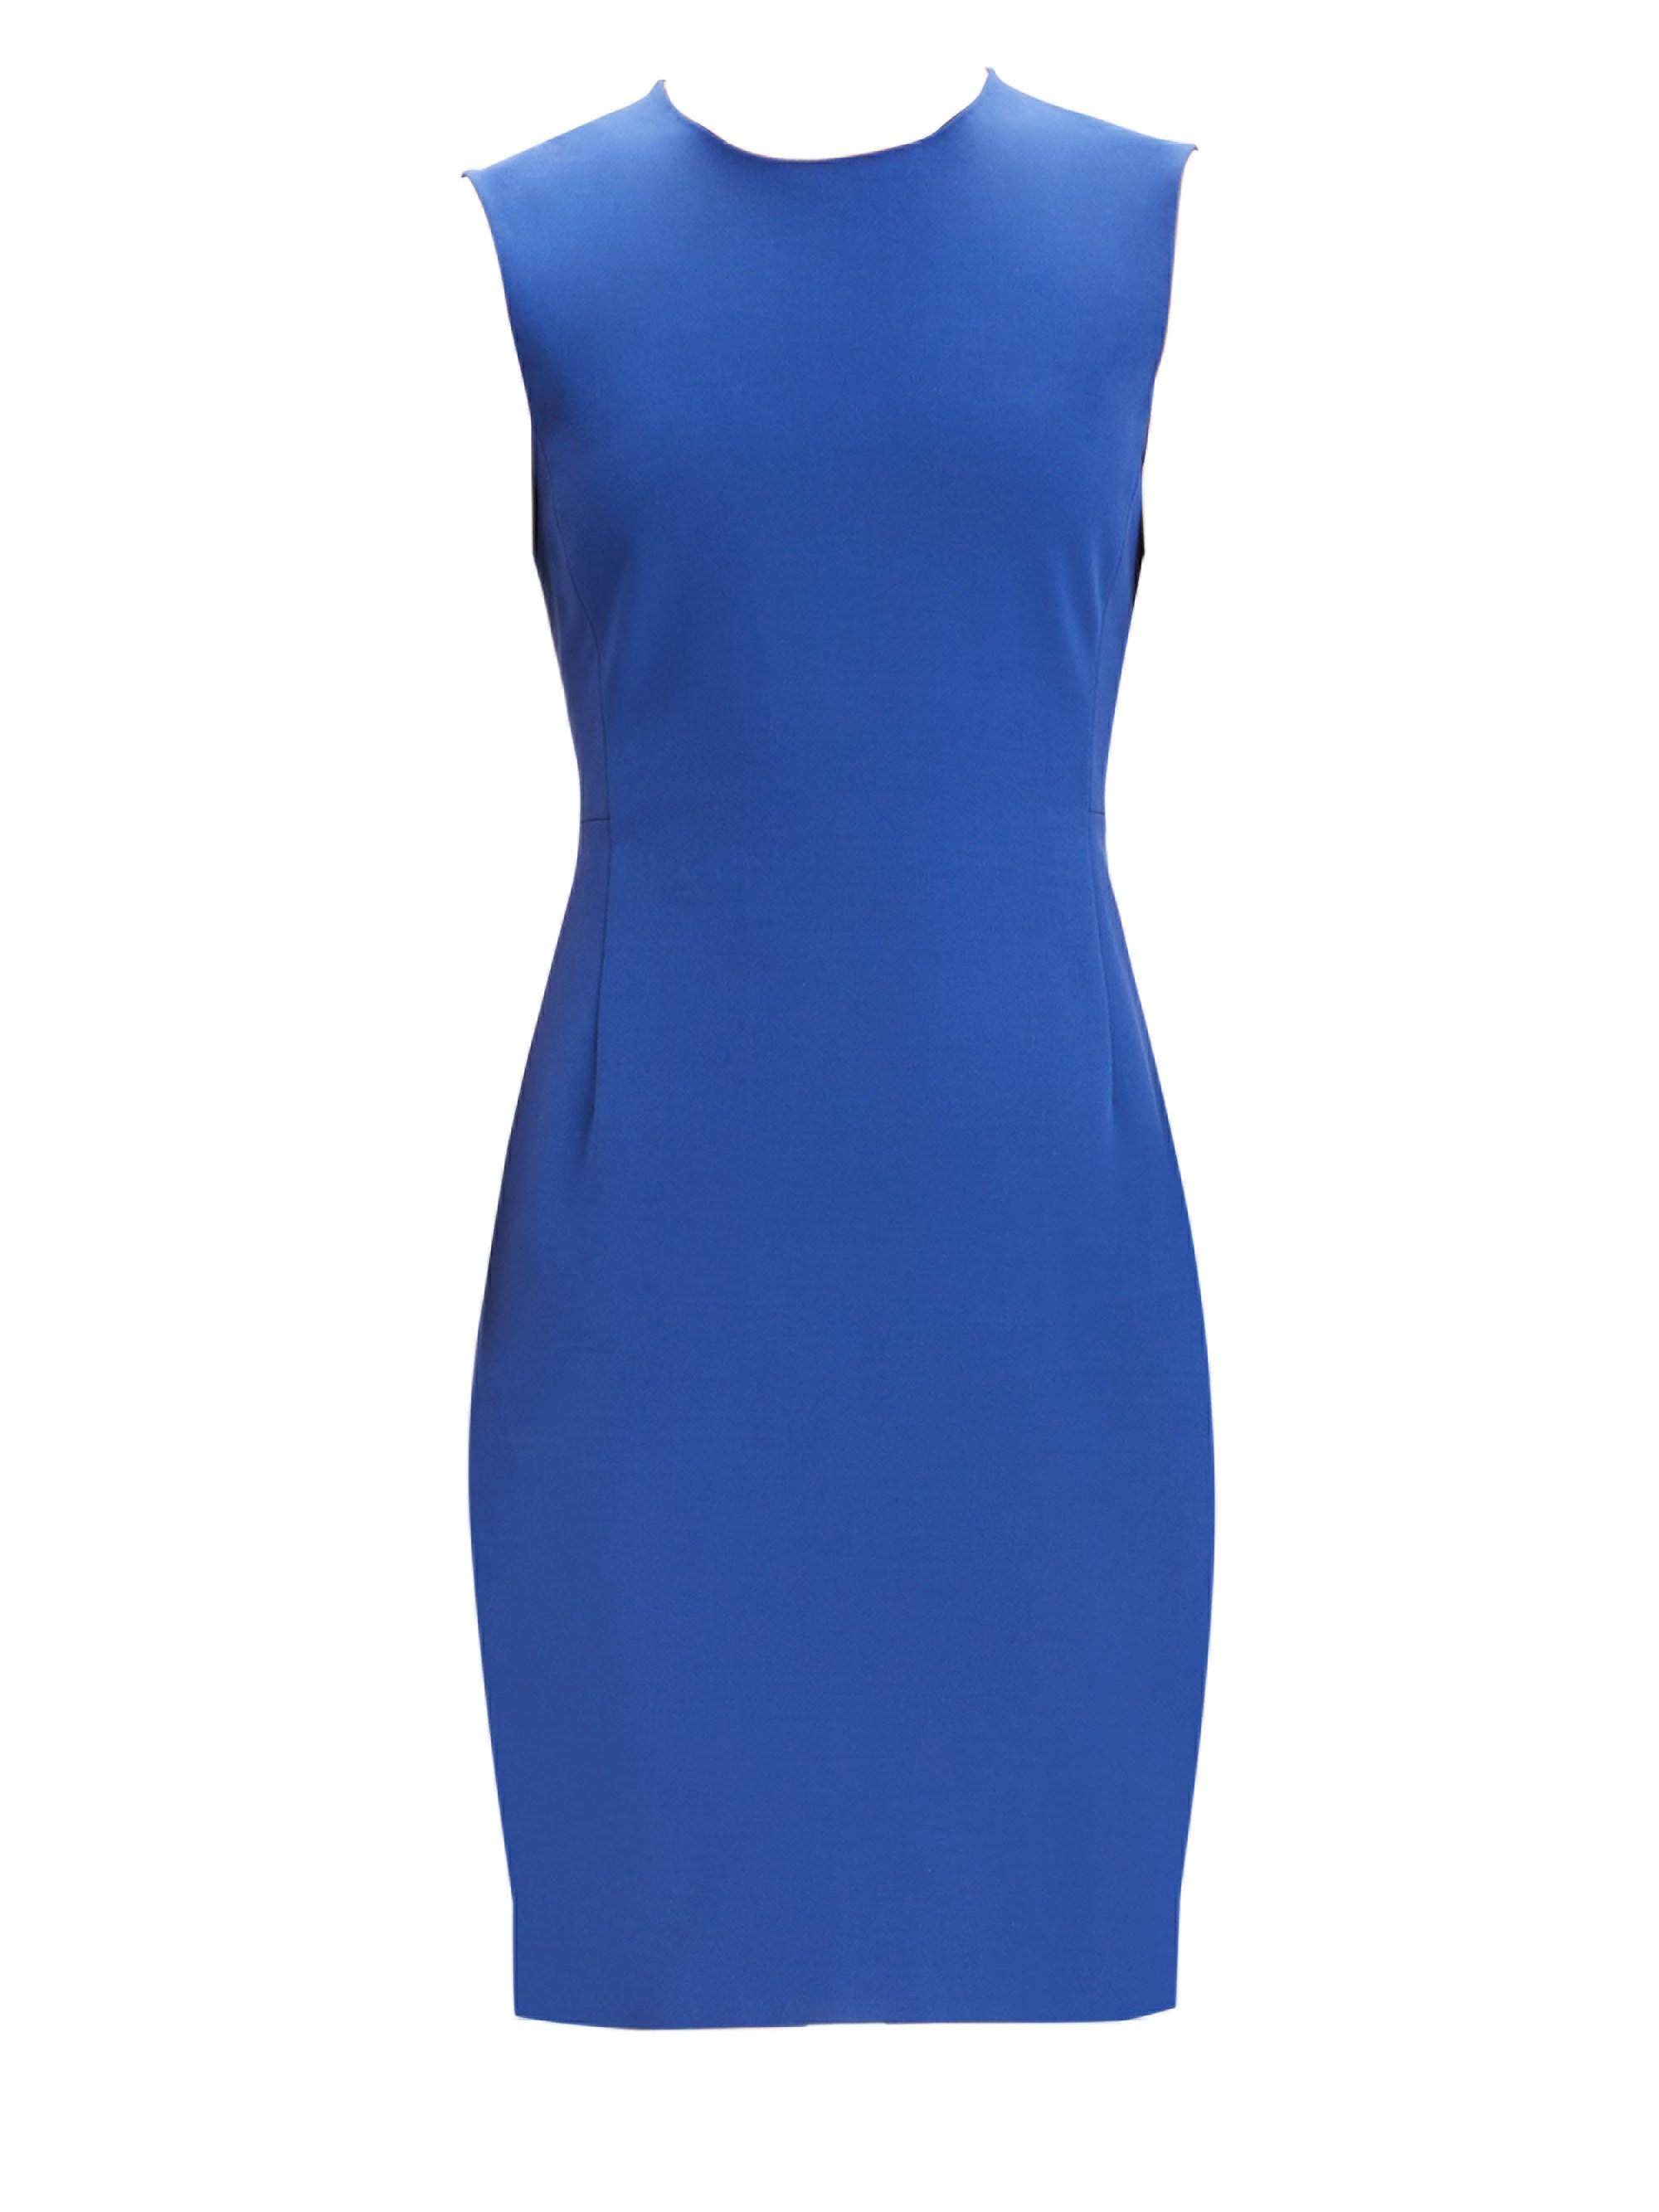 Theory Double Stretch Sleeveless Sheath Dress in Blue - Lyst